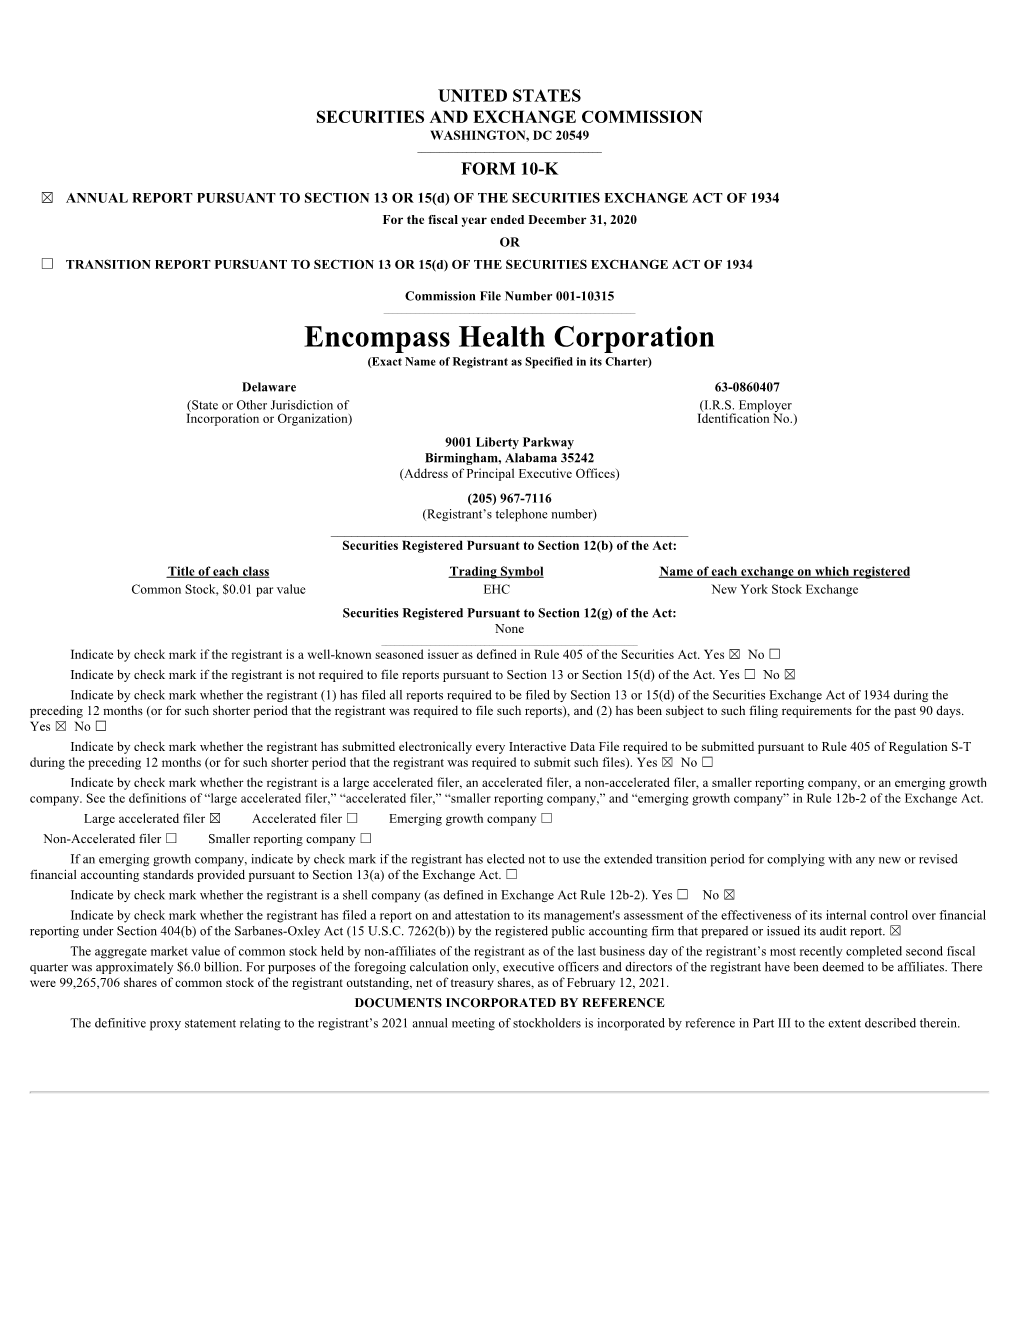 Encompass Health Corporation (Exact Name of Registrant As Specified in Its Charter) Delaware 63-0860407 (State Or Other Jurisdiction of (I.R.S